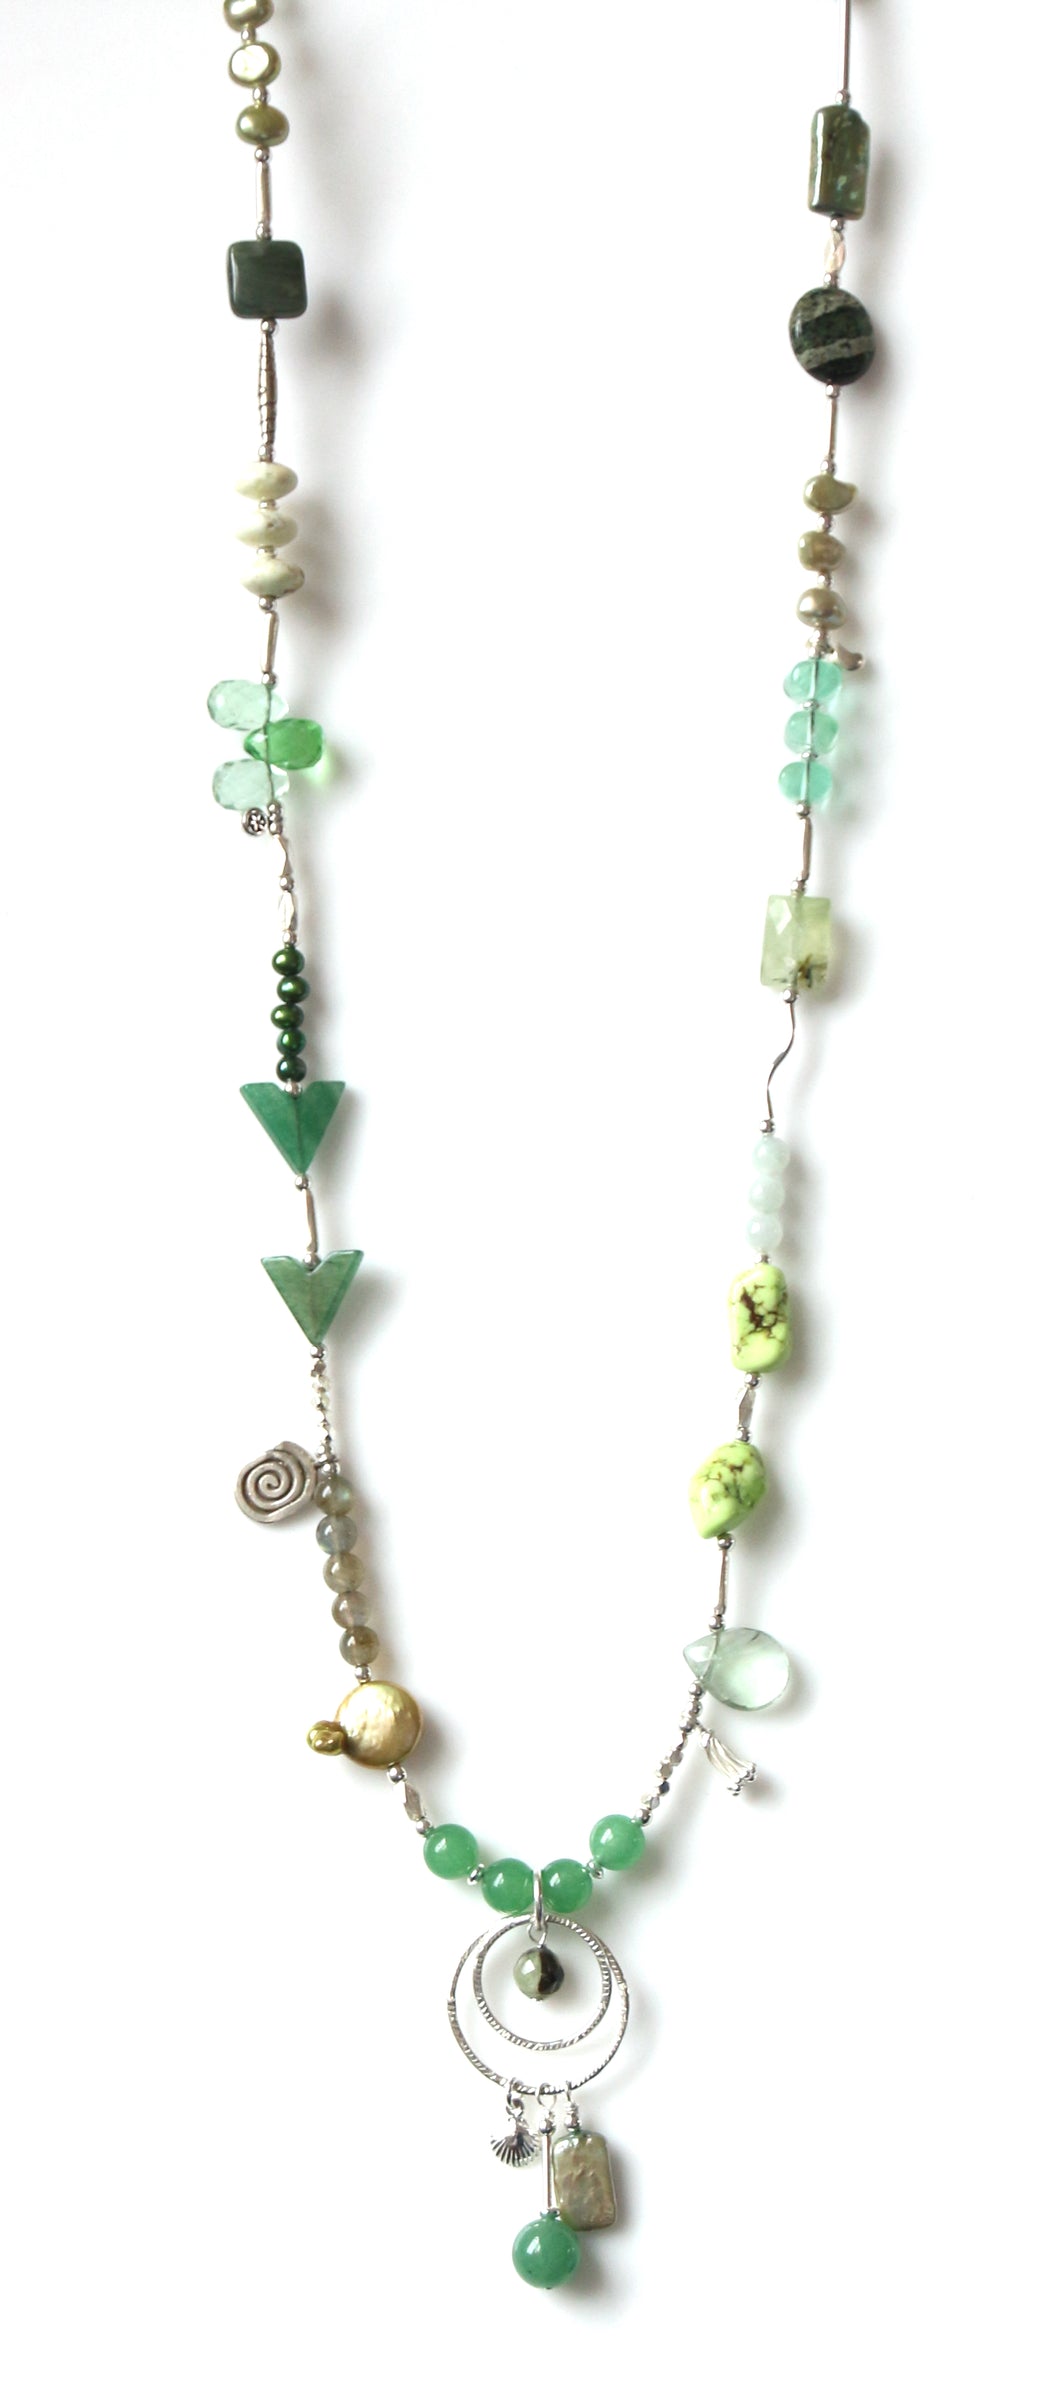 Australian Green Necklace with Pearls Aventurine Fluorite and Sterling Silver